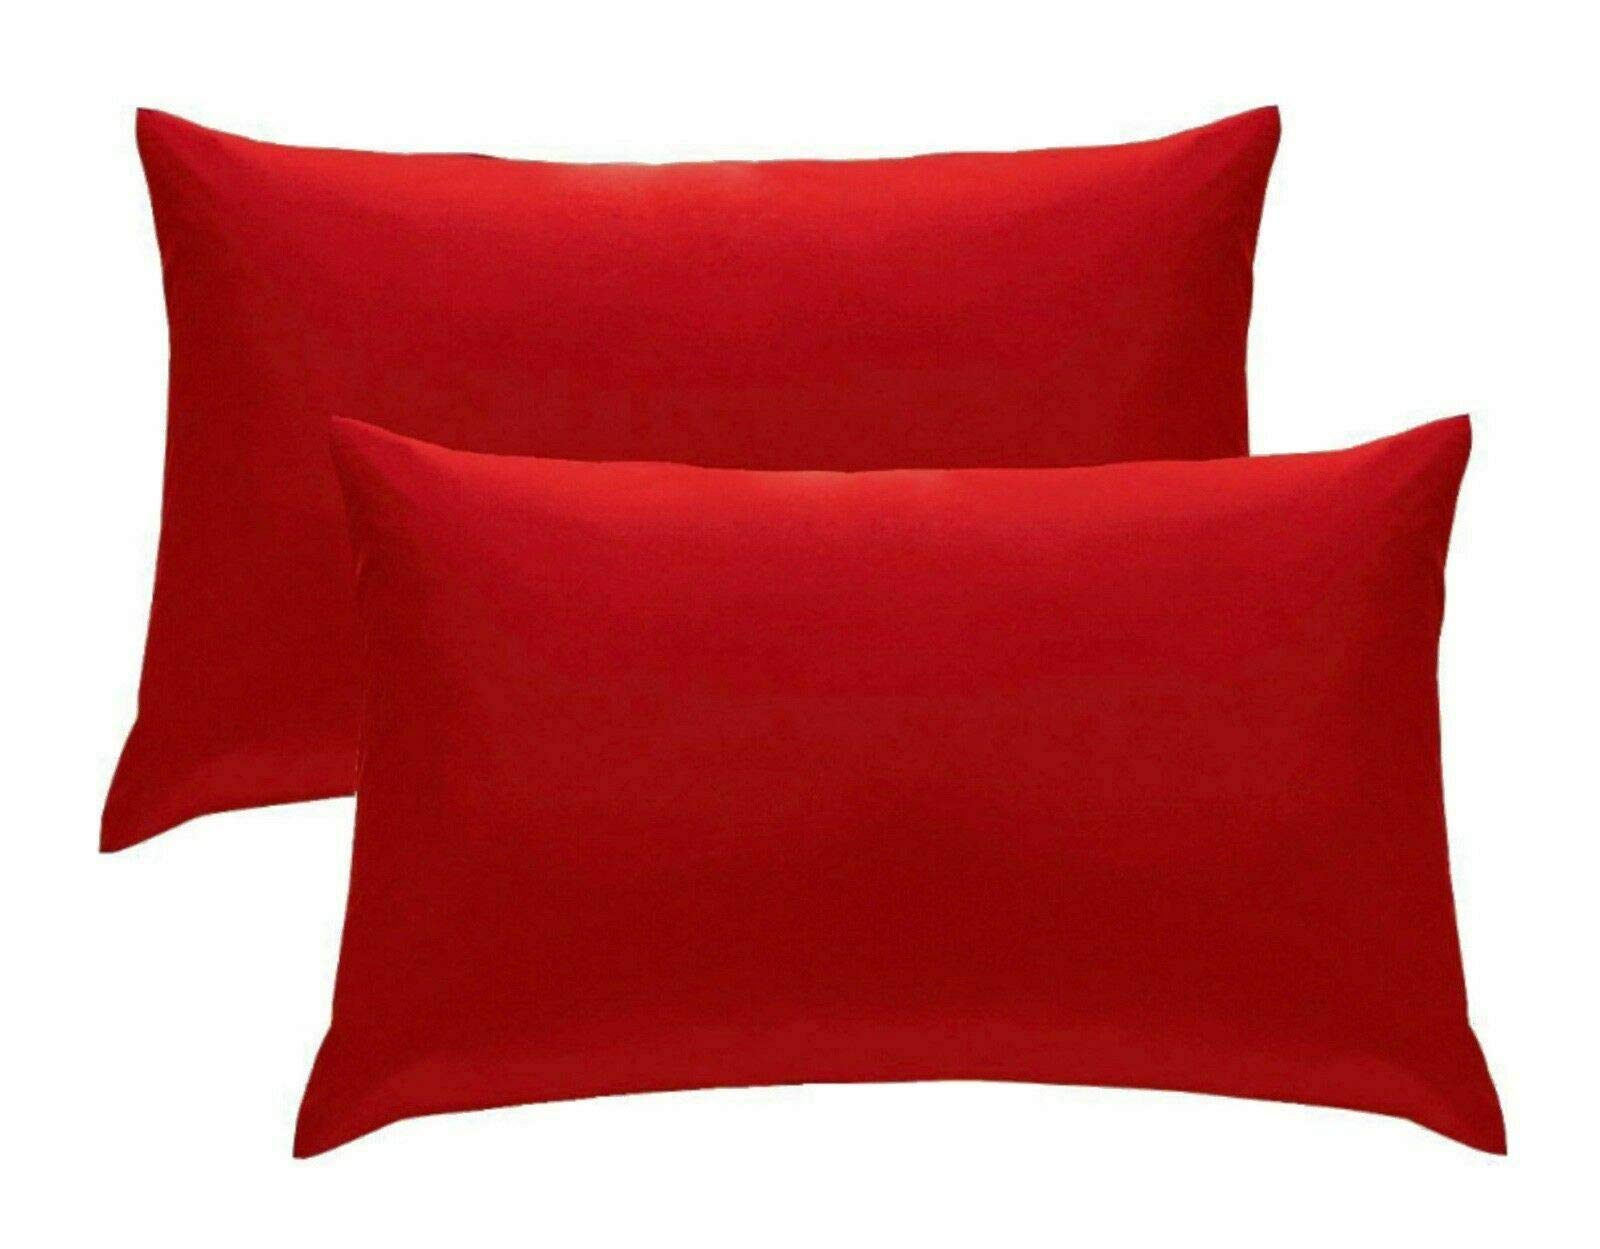 Pack Of 2 100% Poly Cotton Housewife Pillow Case/Cover Soft Plain Dyed For Bedroom Pillowcase Pair (Red)